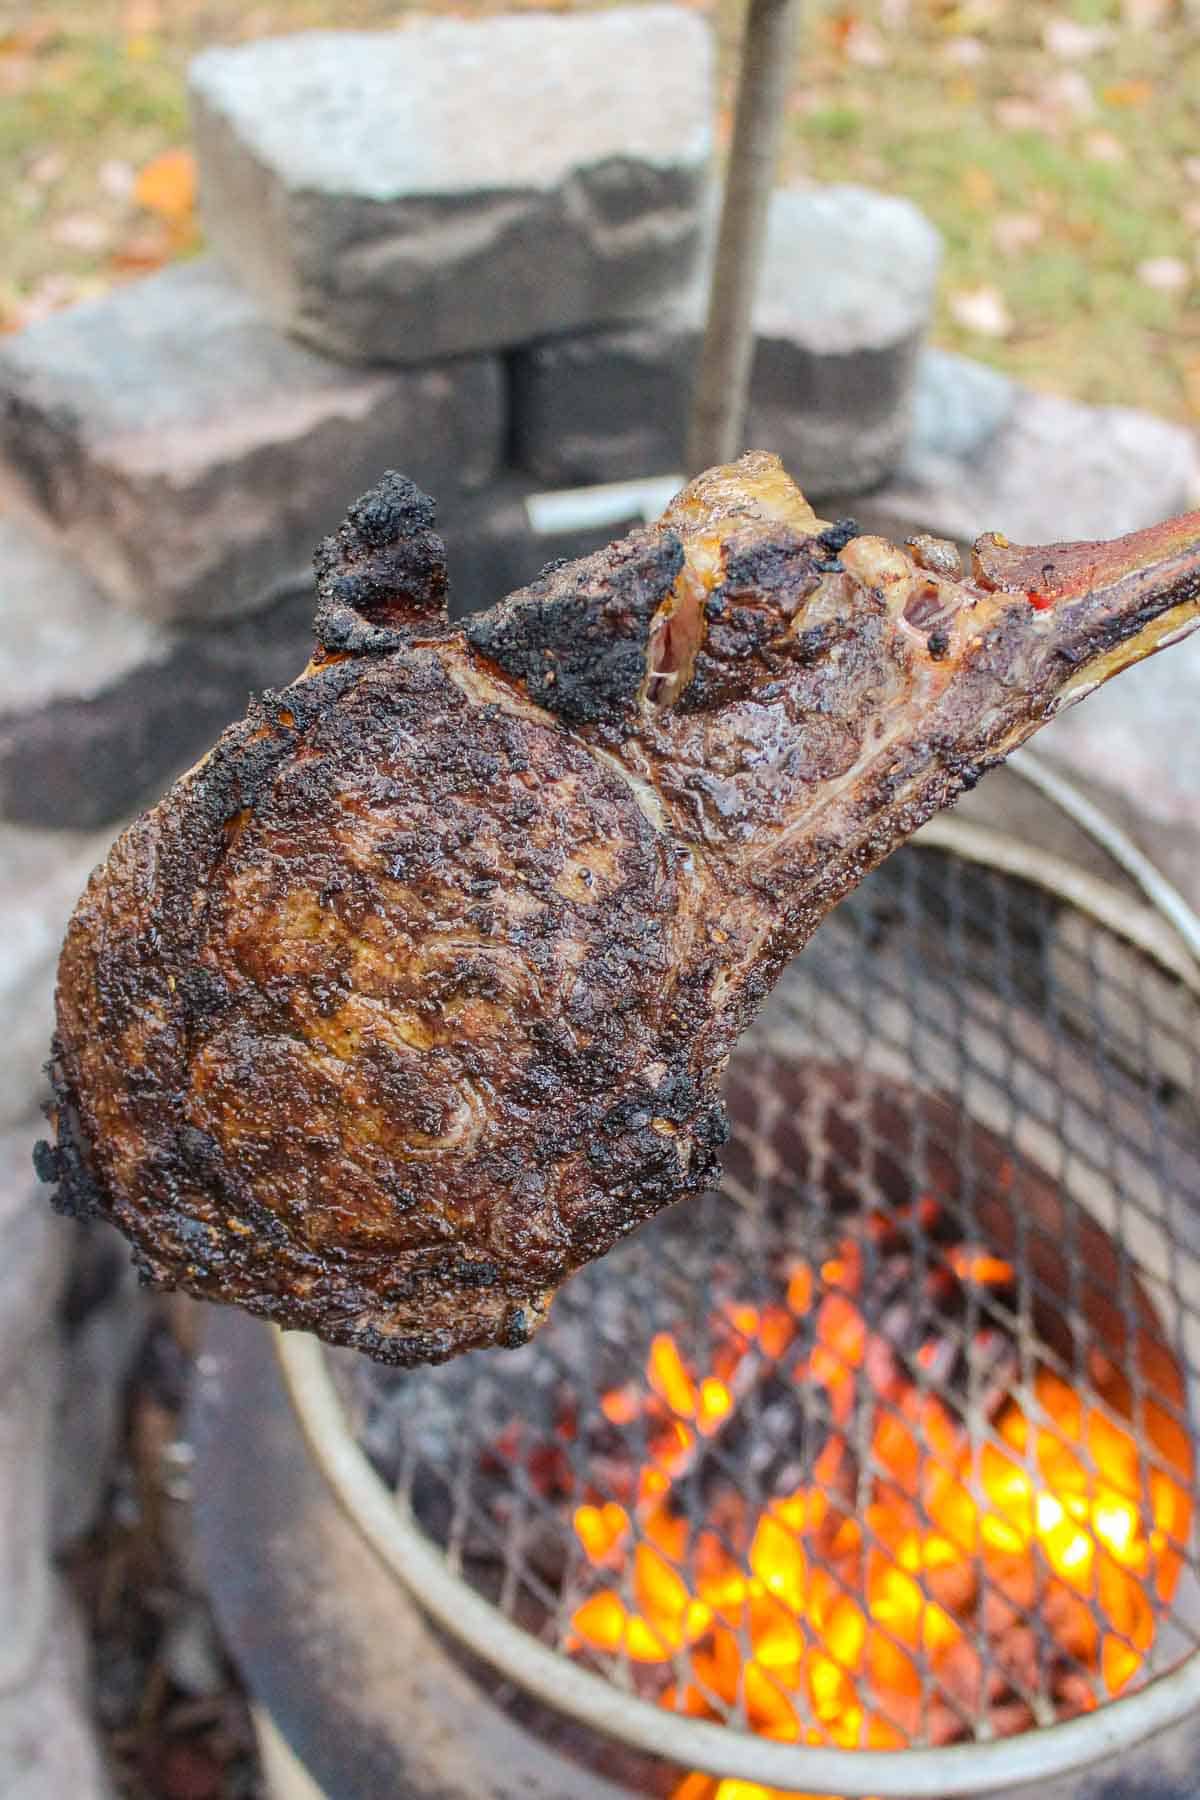 A close up of the crush on the tomahawk steak.